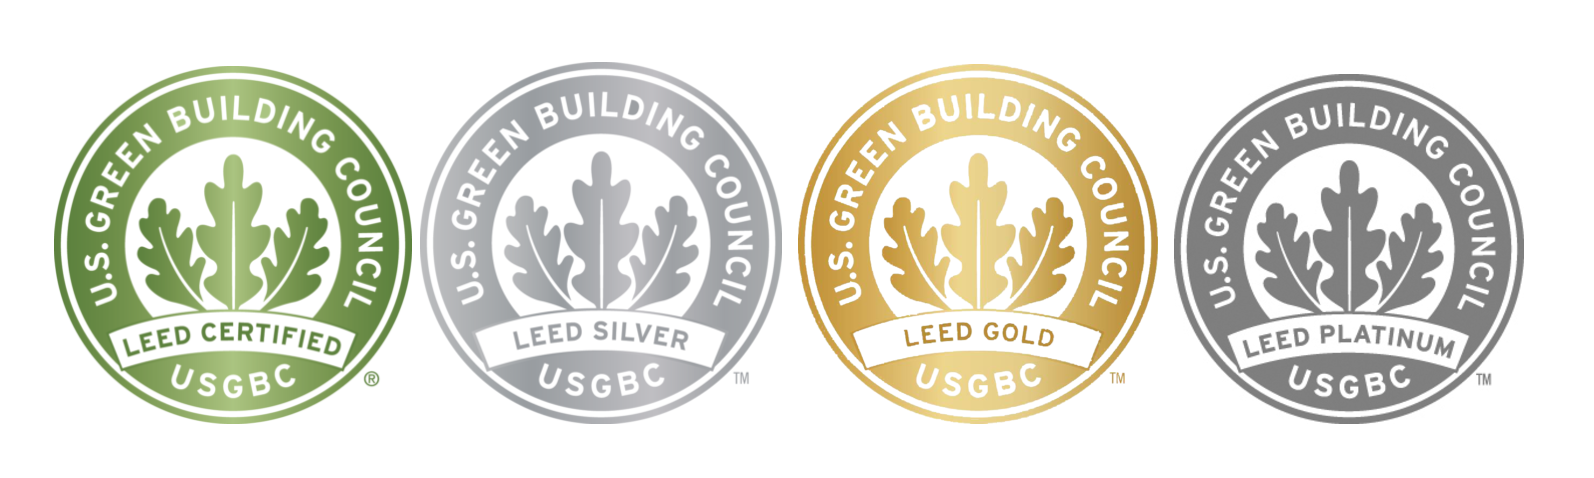 4 different levels of LEED certified seals from the U.S. Green Building Council ranging in ascending order from green, silver, gold and platinum